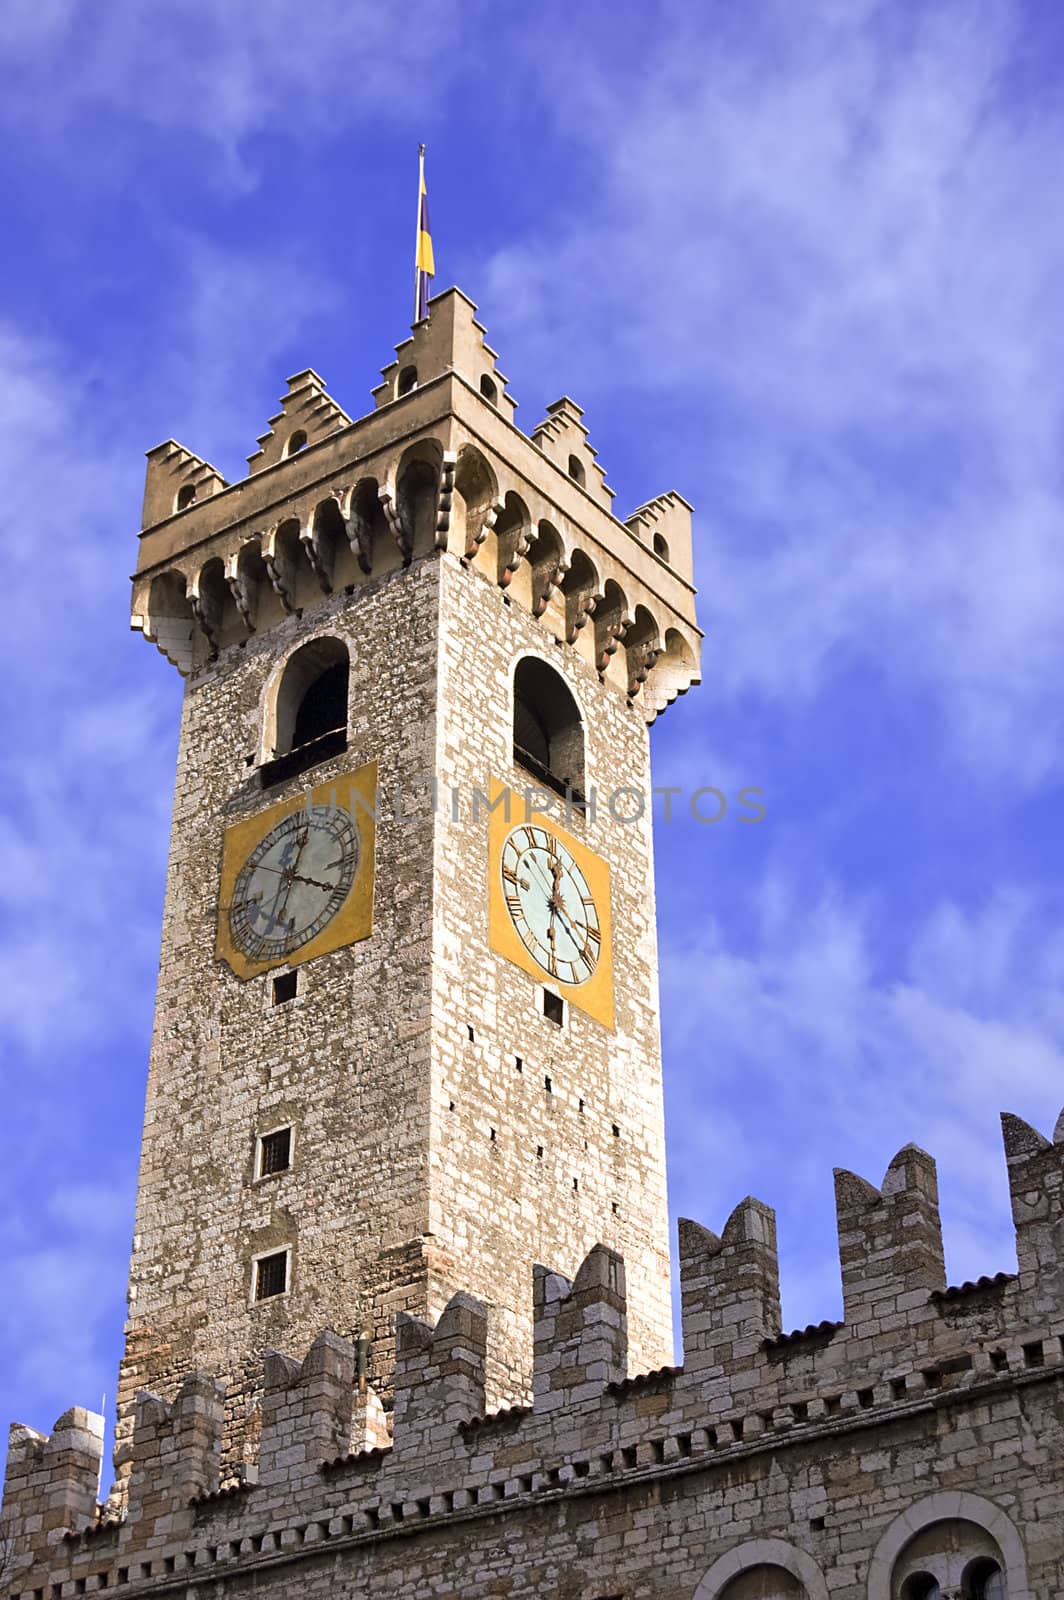 Medieval tower with clock of a caste in Trento (Italy)